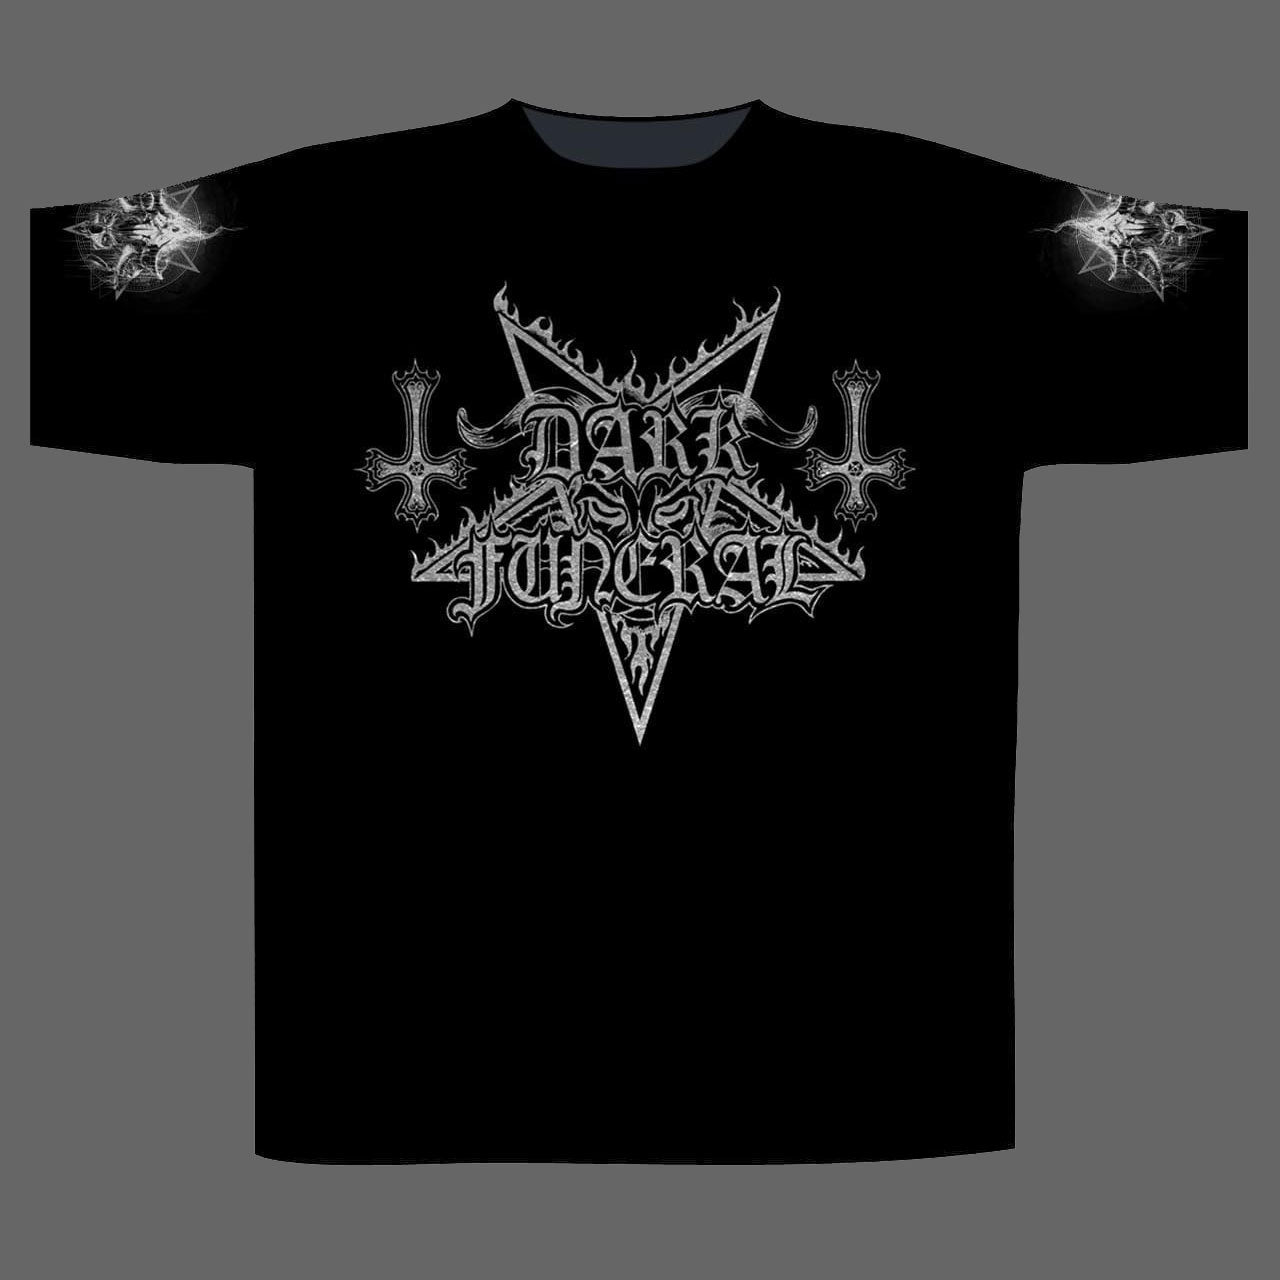 Dark Funeral - To Carve Another Wound (T-Shirt)